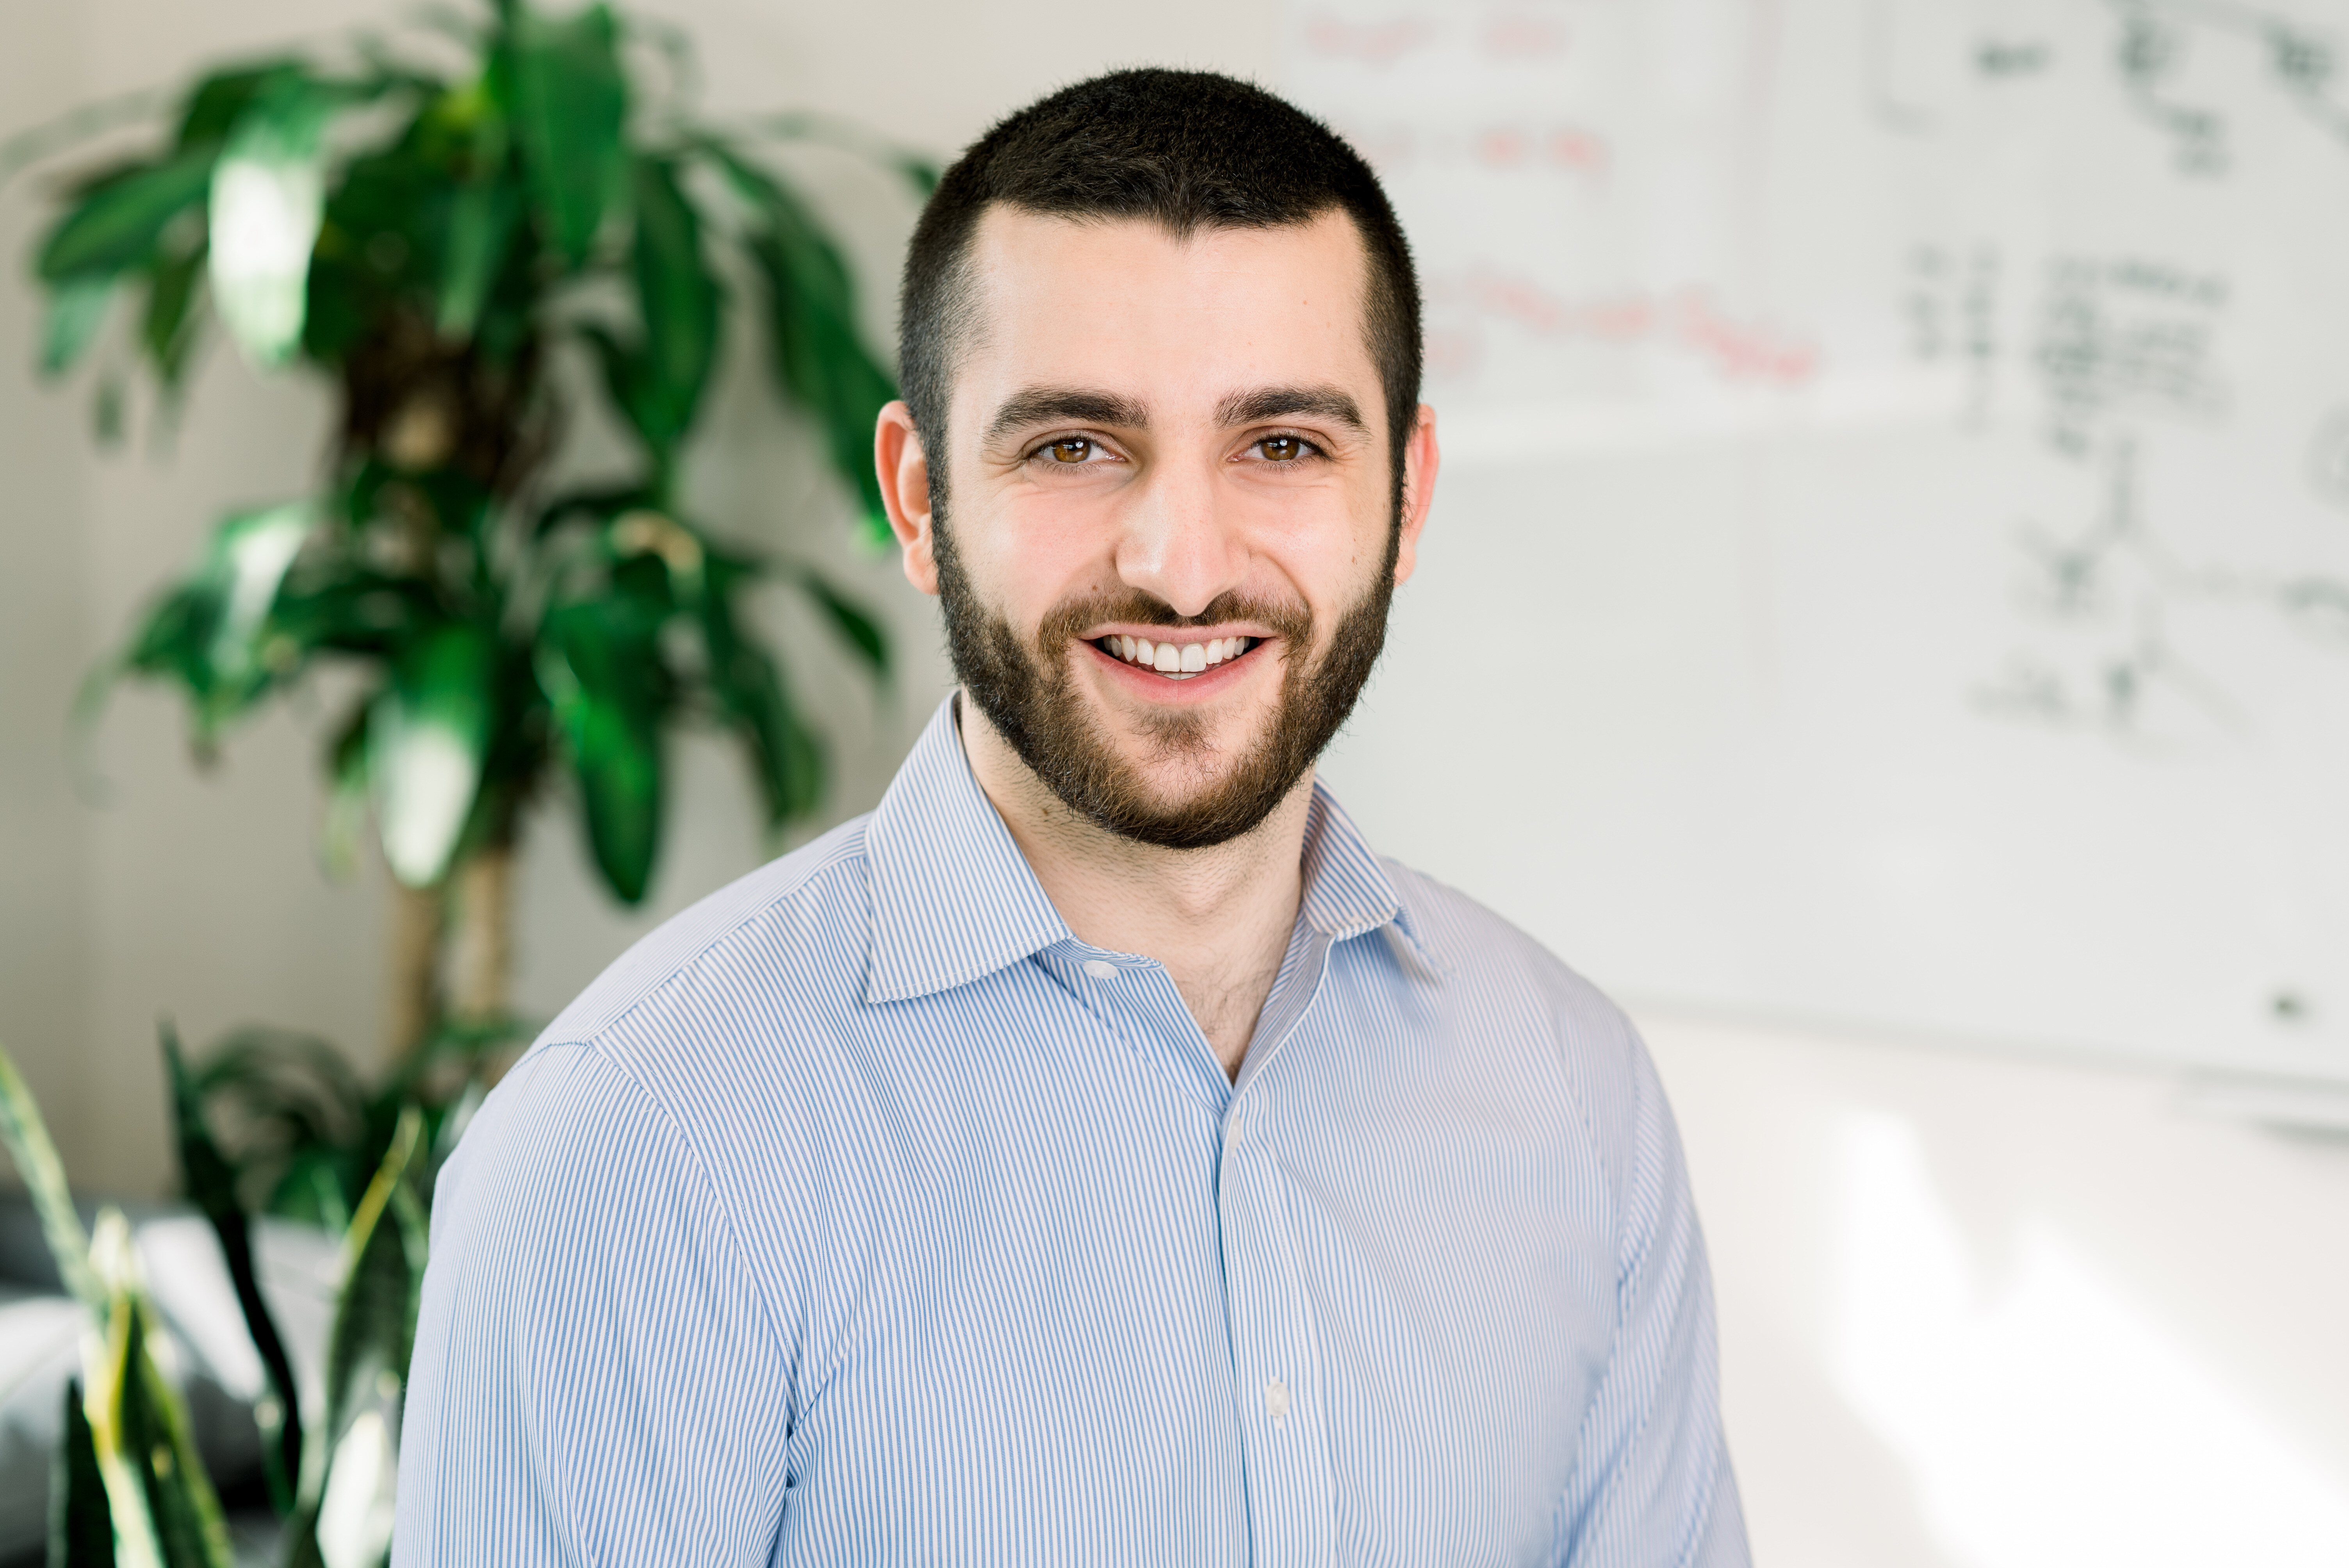 ZwitterCo's CEO and co-founder Alex Rappaport